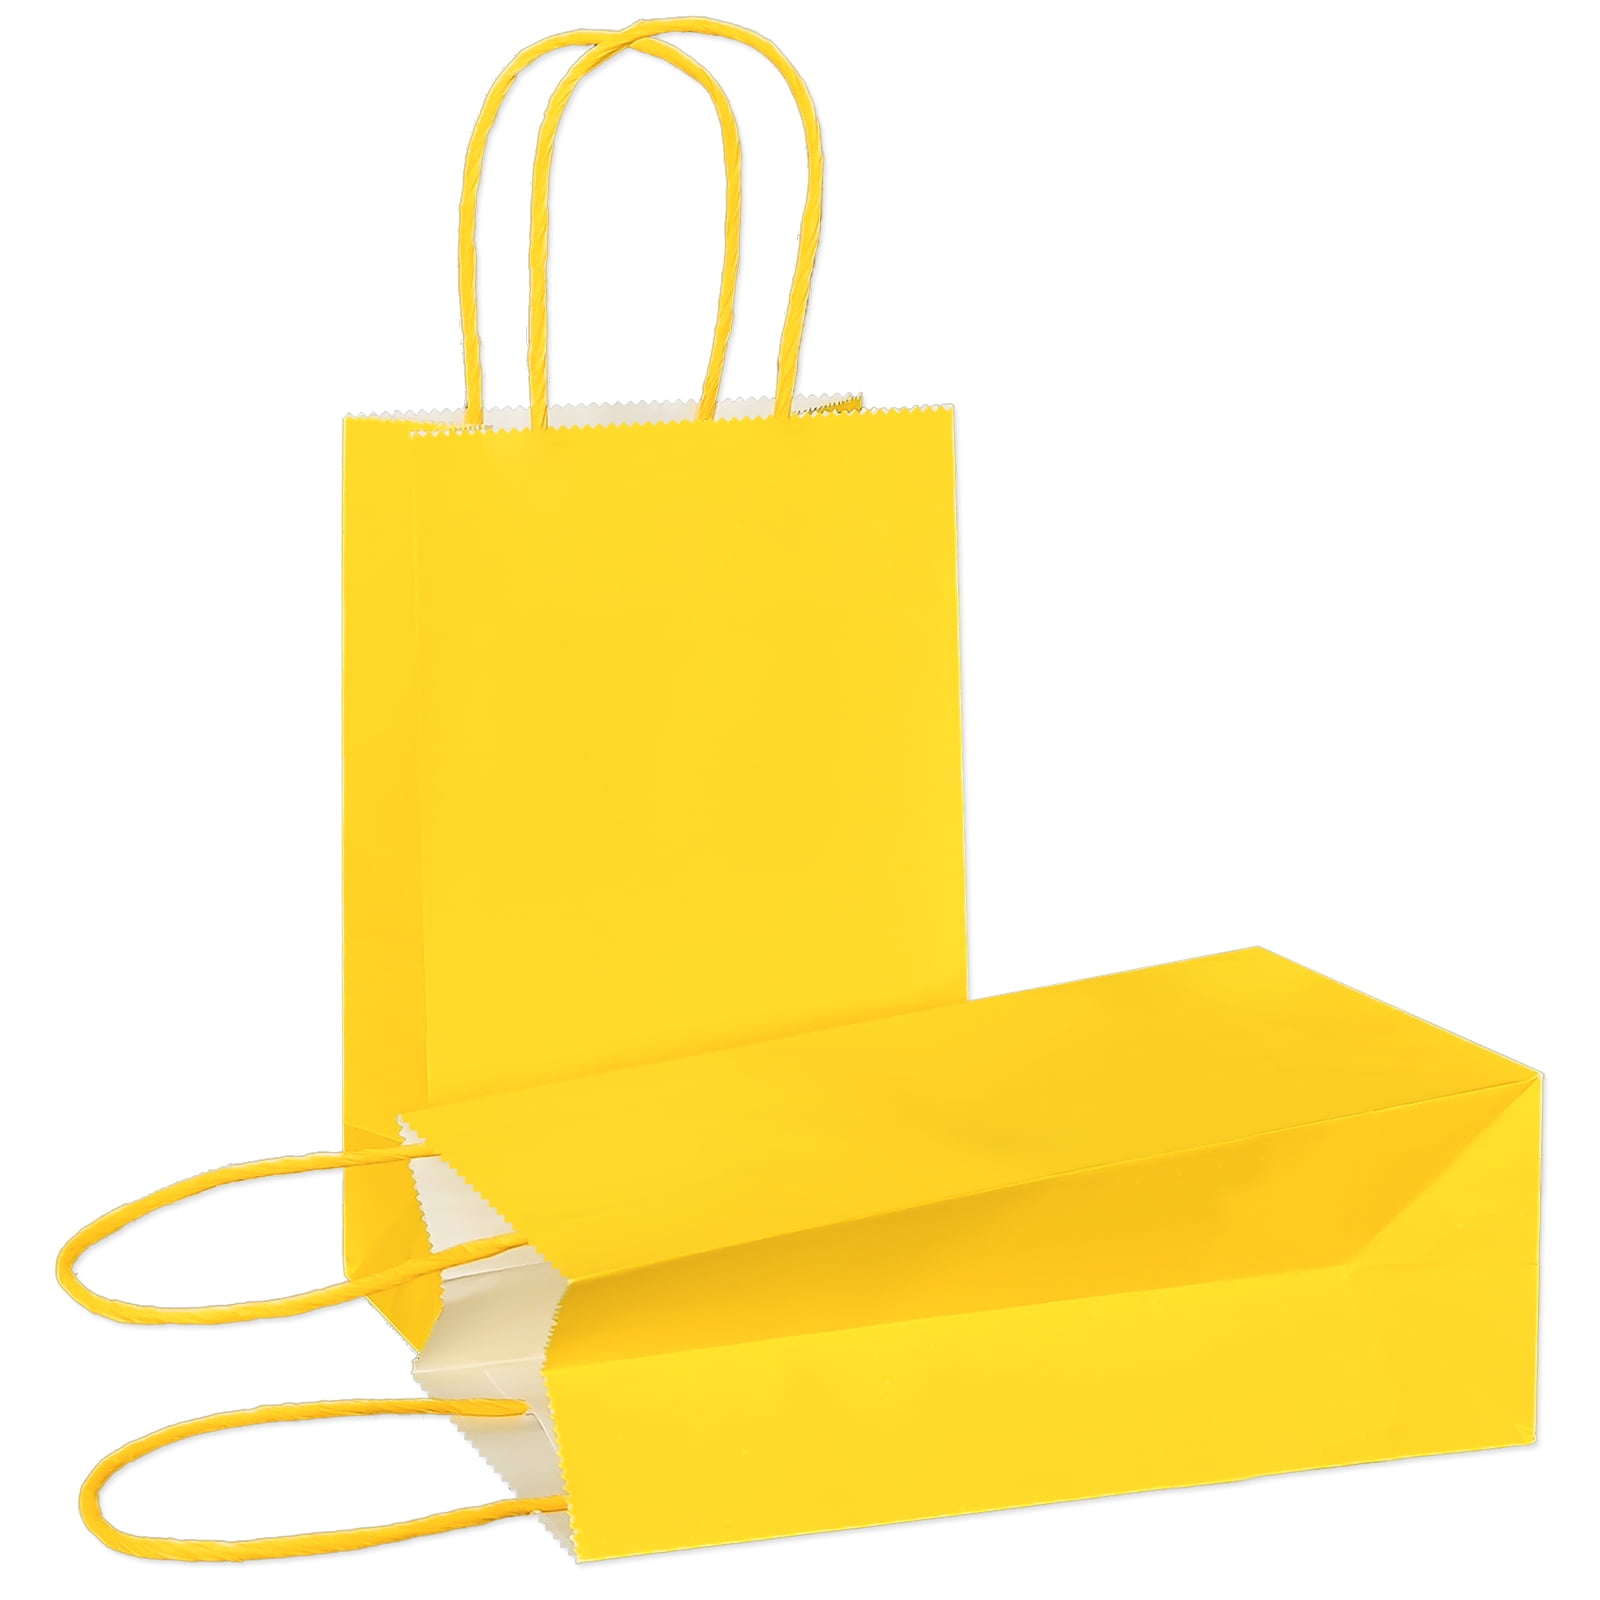 AZOWA Gift Bags Large Kraft Paper Bags with Handles 12.2 x 10.2 x 4.7 in, Yellow, 25 Pcs 